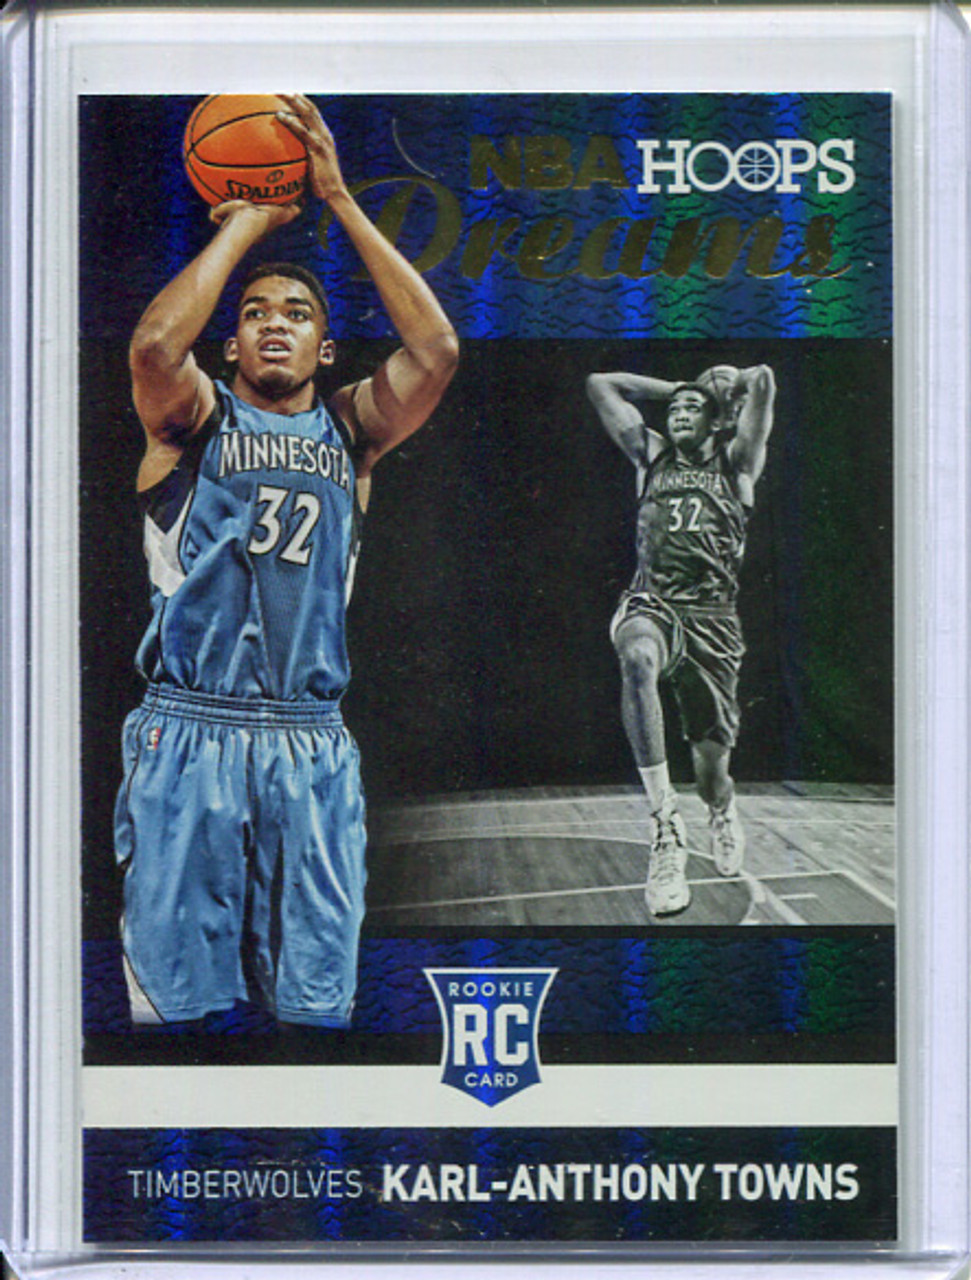 Karl-Anthony Towns 2015-16 Hoops, Dreams #6